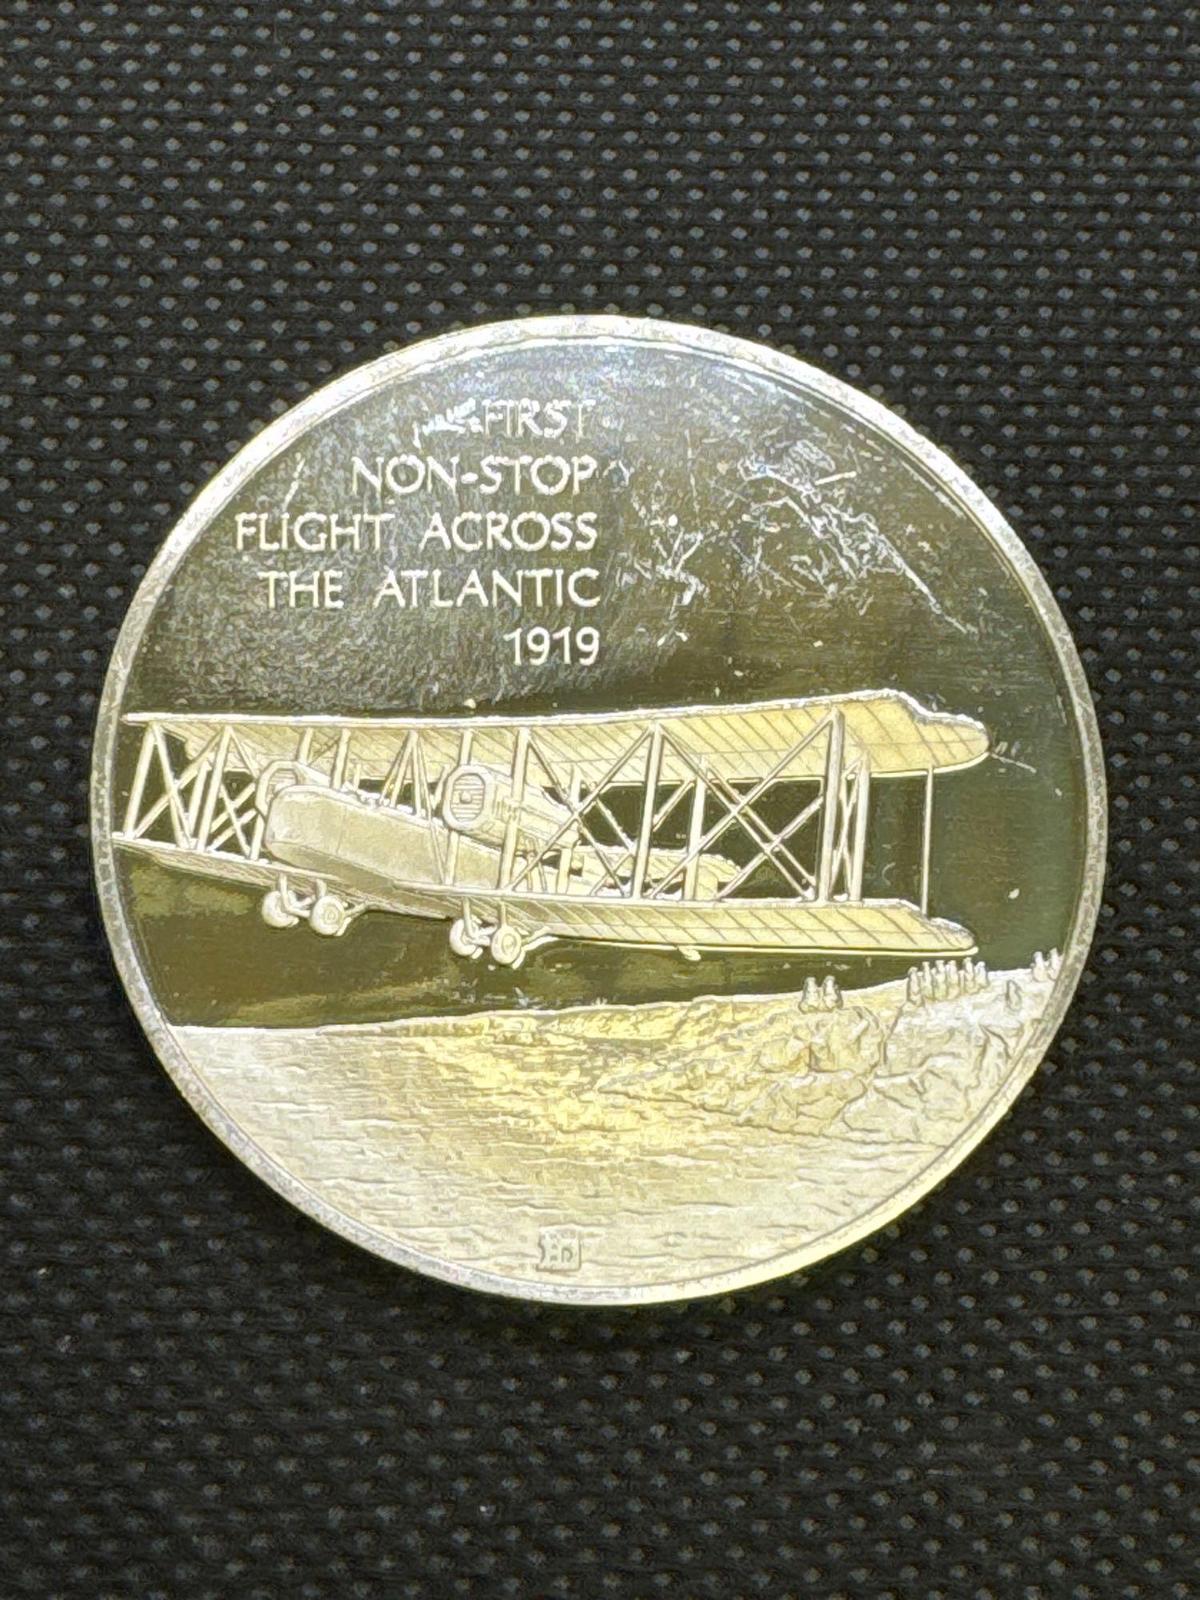 History Of Flight 1st Non-Stop Flight Across The Atlantic 1919 Sterling Silver Coin 1.33 Oz